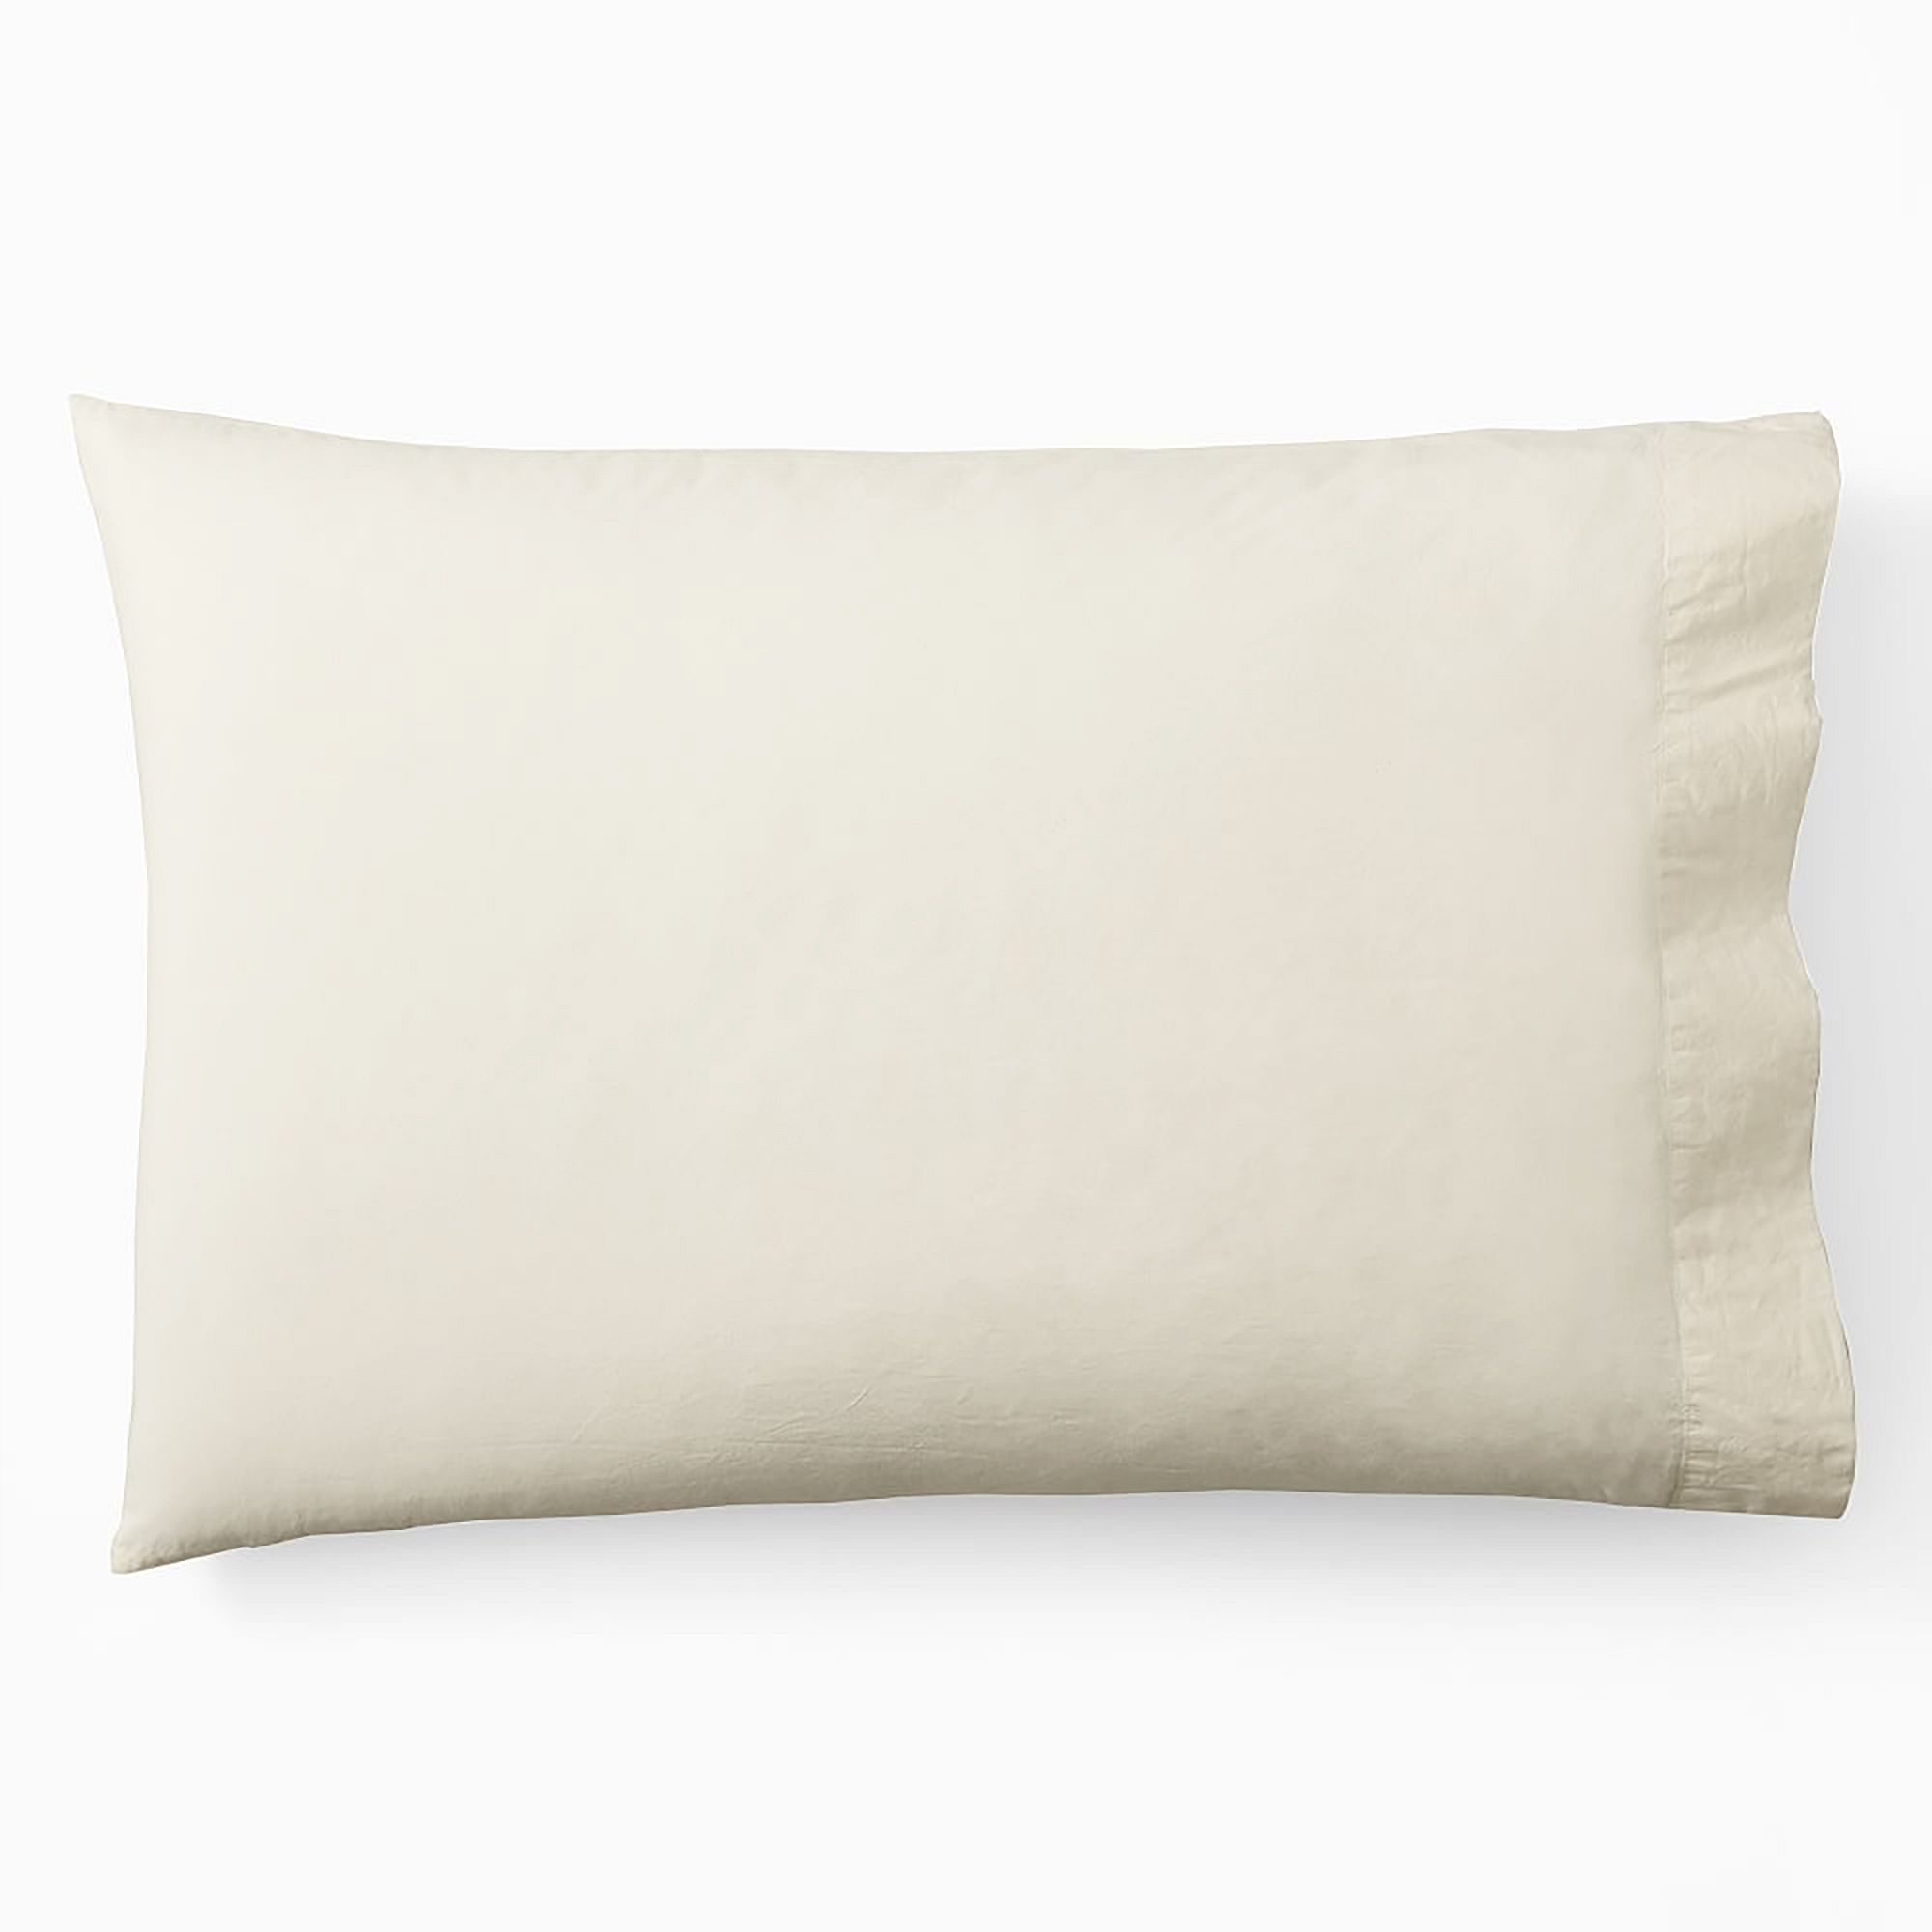 A pillow covered in a beige West elm organic washed cotton pillowcase